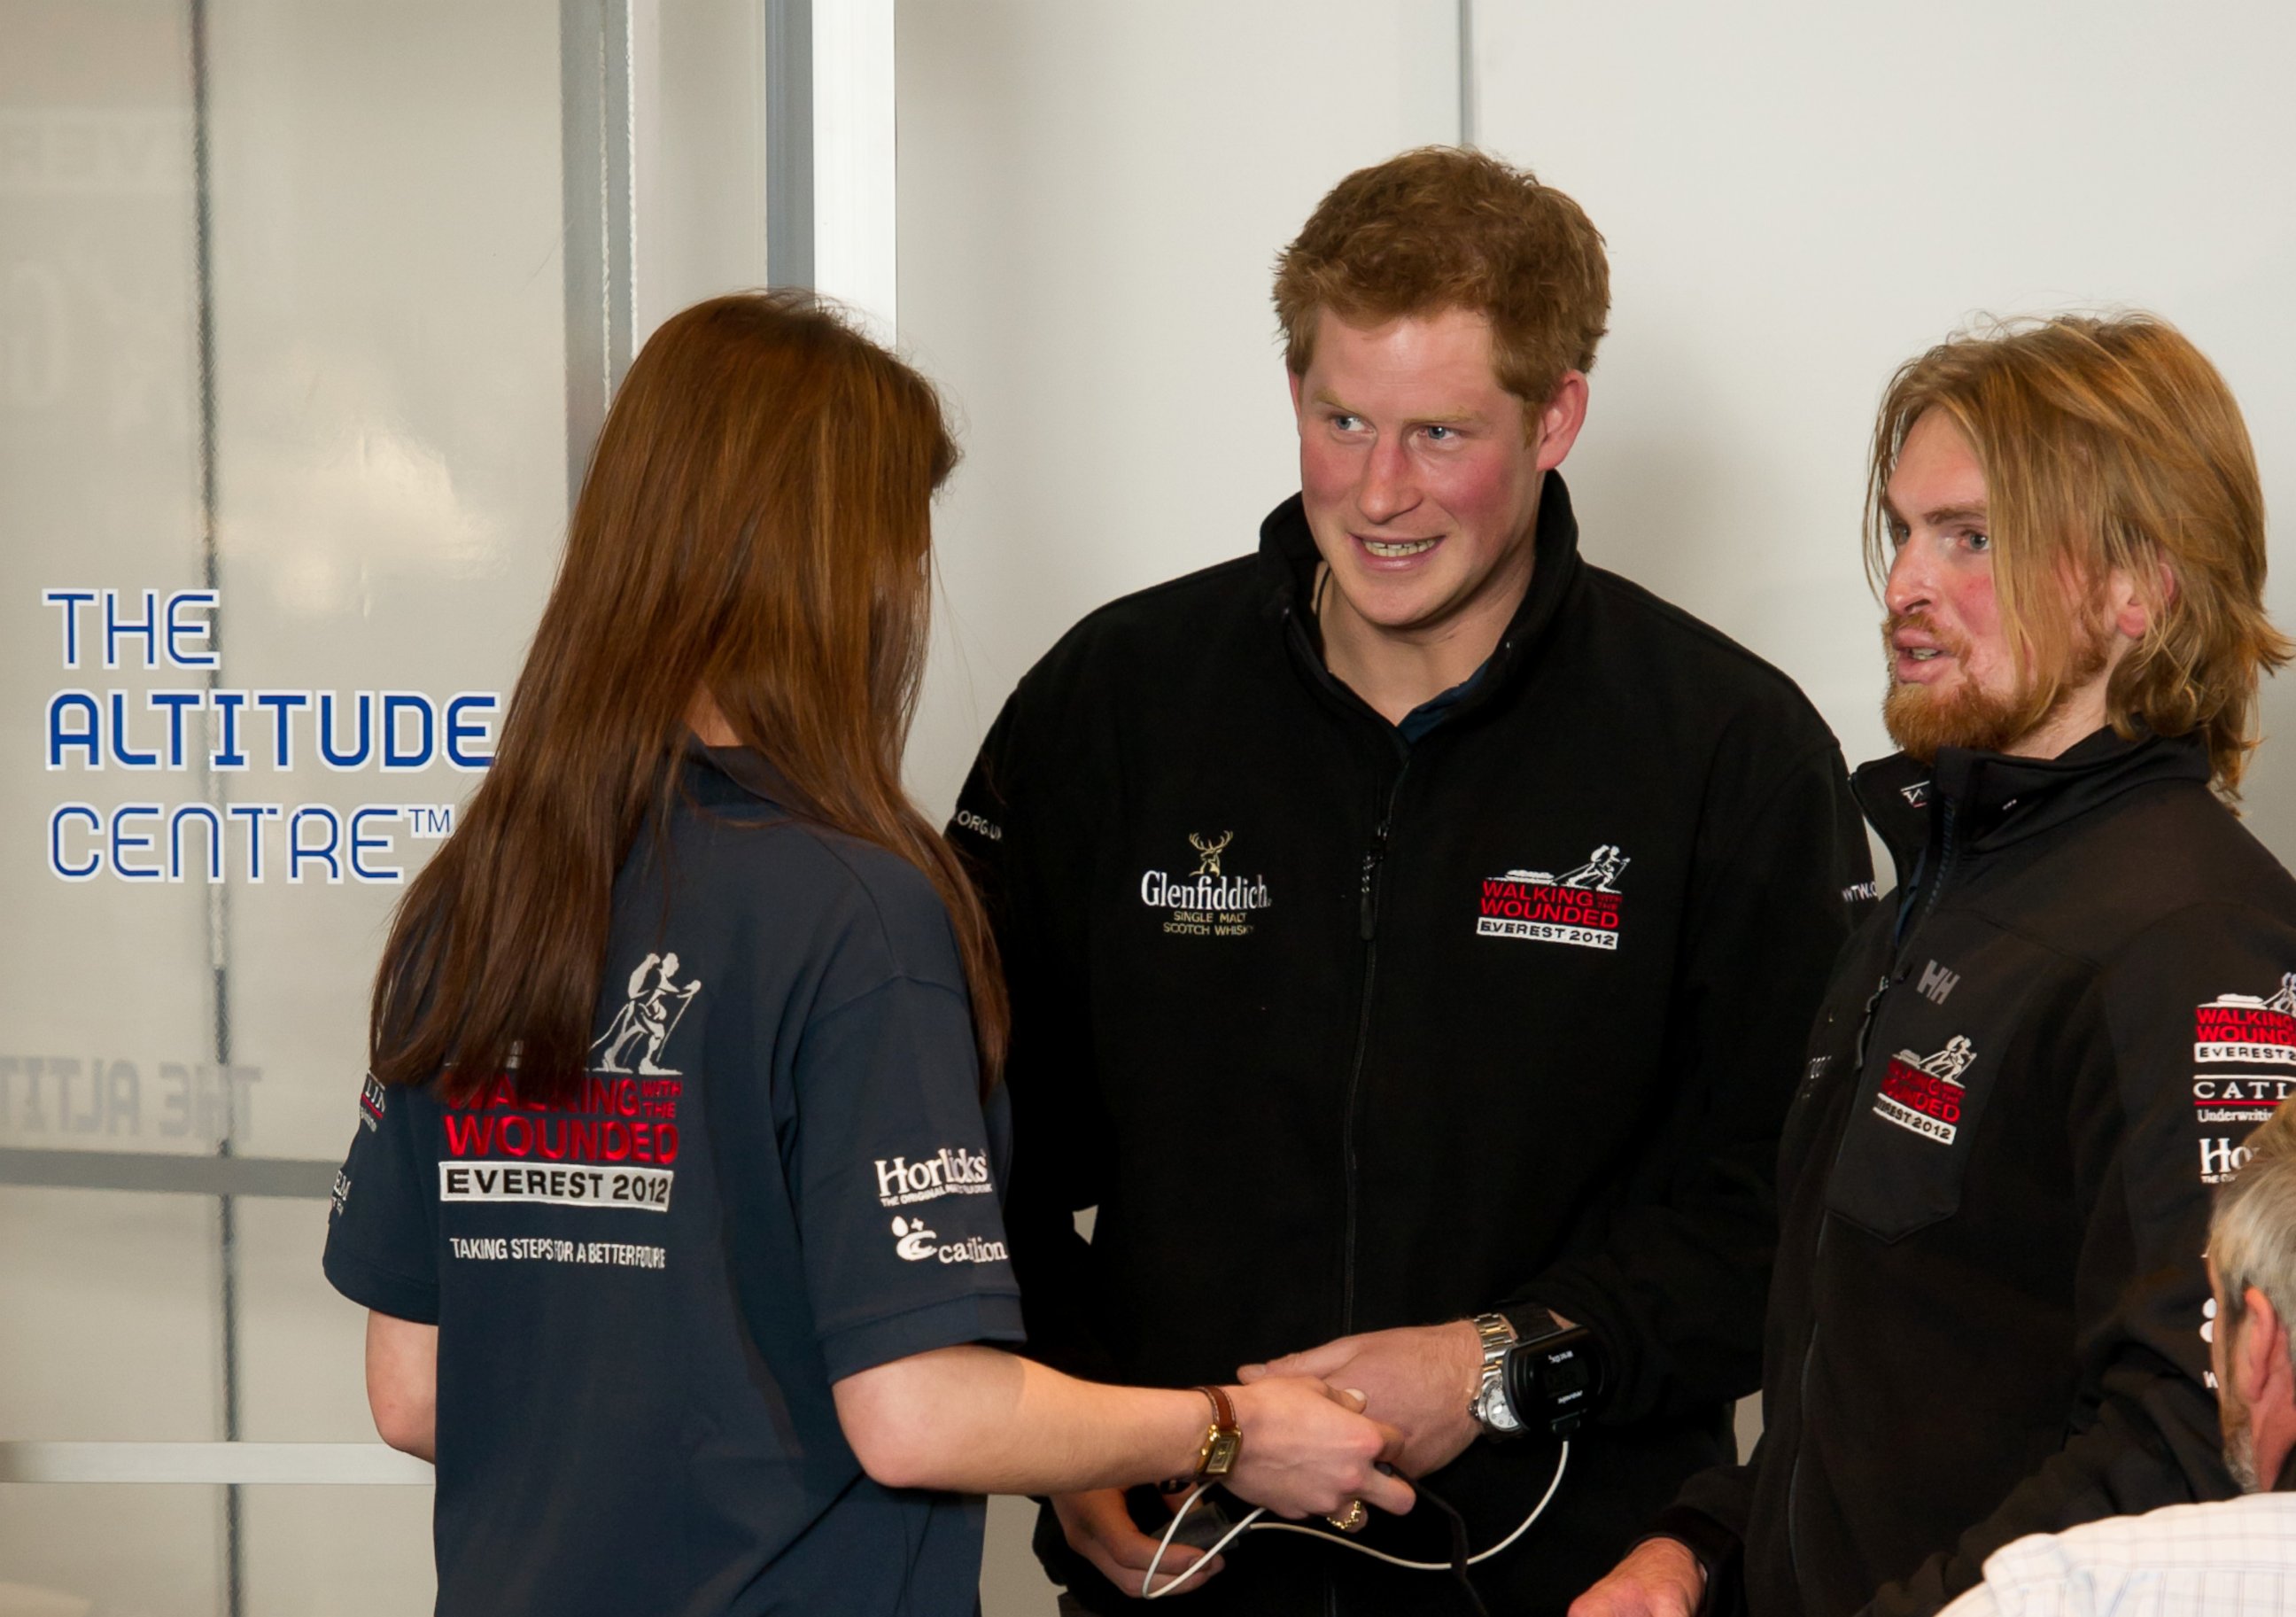 PHOTO: LONDON, ENGLAND - FEBRUARY 10: Prince Harry and Private Karl Hinett of the Staffordshire Regiment exit the altitude chamber during the 'Walking With The Wounded Everest 2012' expedition launch at BAFTA, Feb. 10, 2012, in London. 